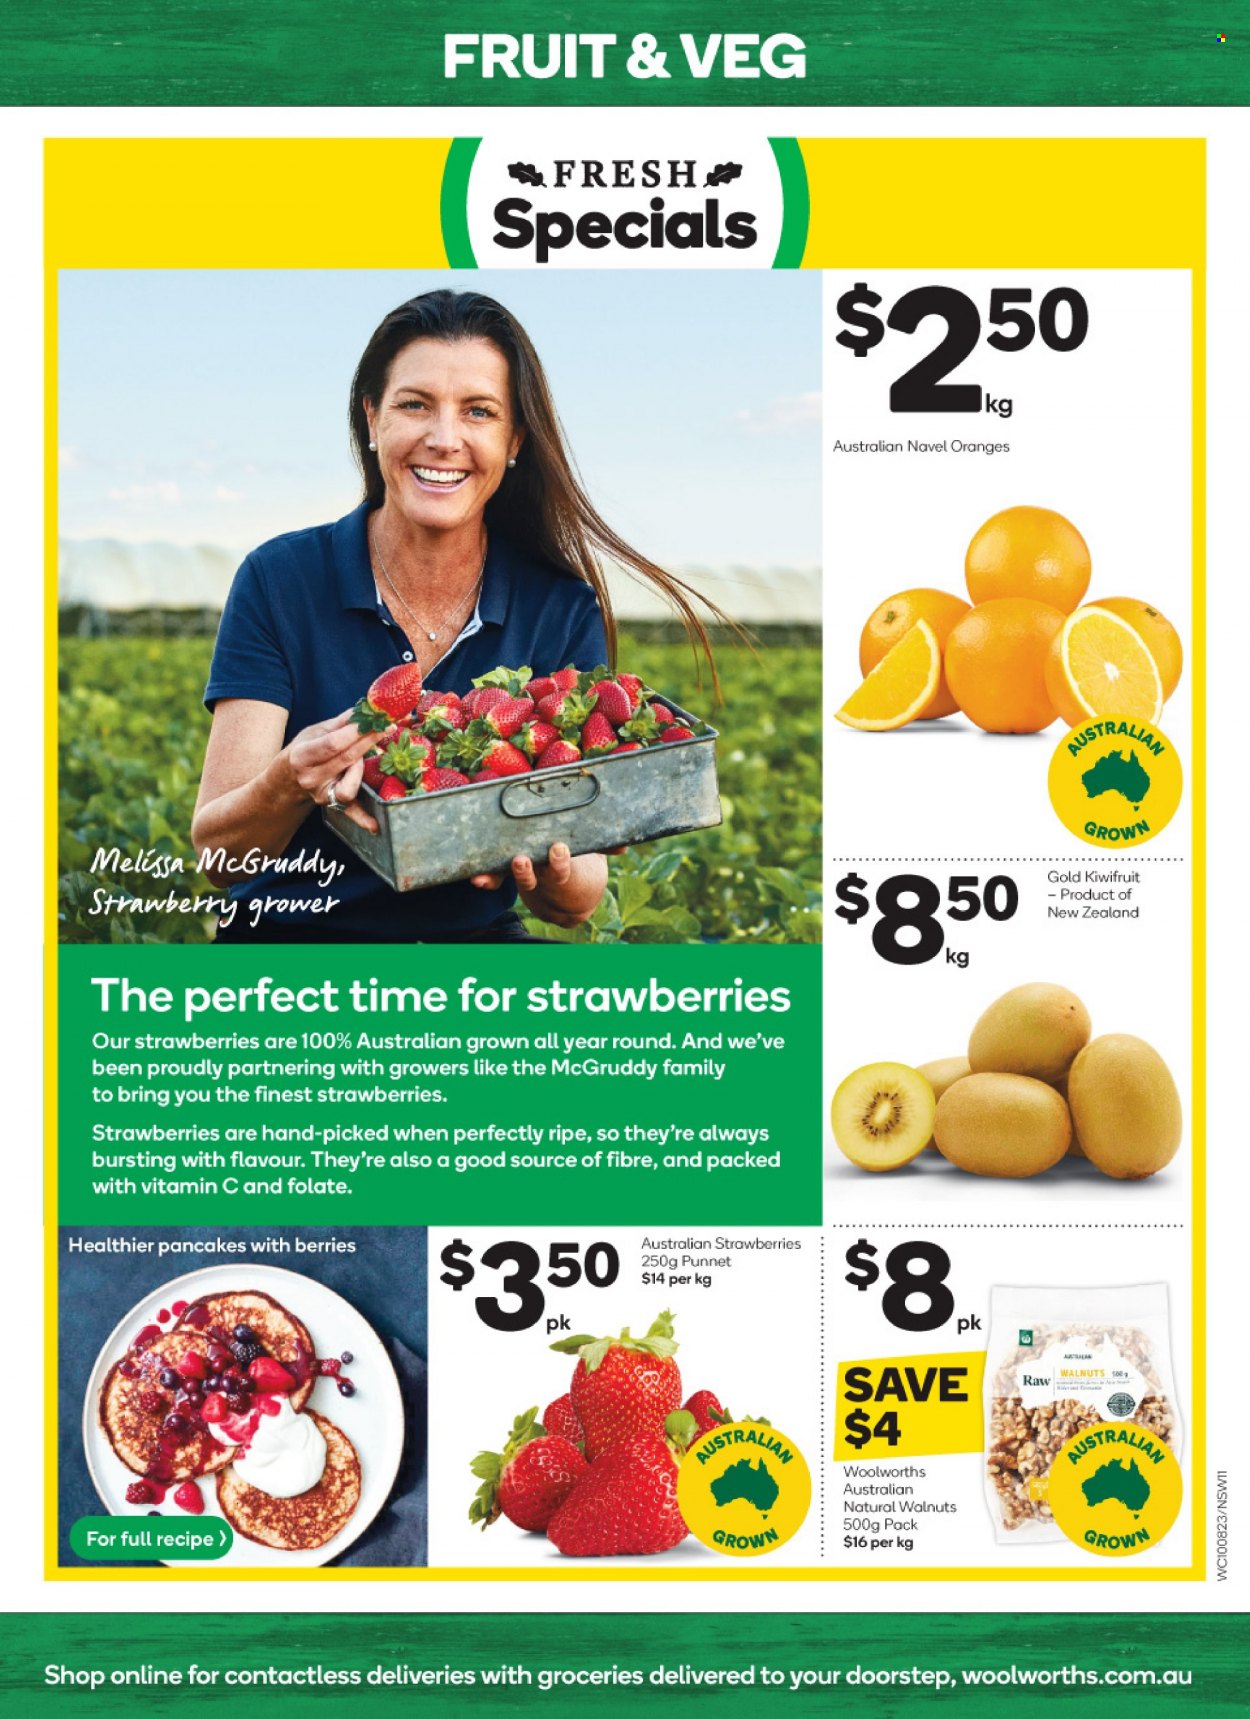 Woolworths catalogue - 10.8.2022 - 16.8.2022.